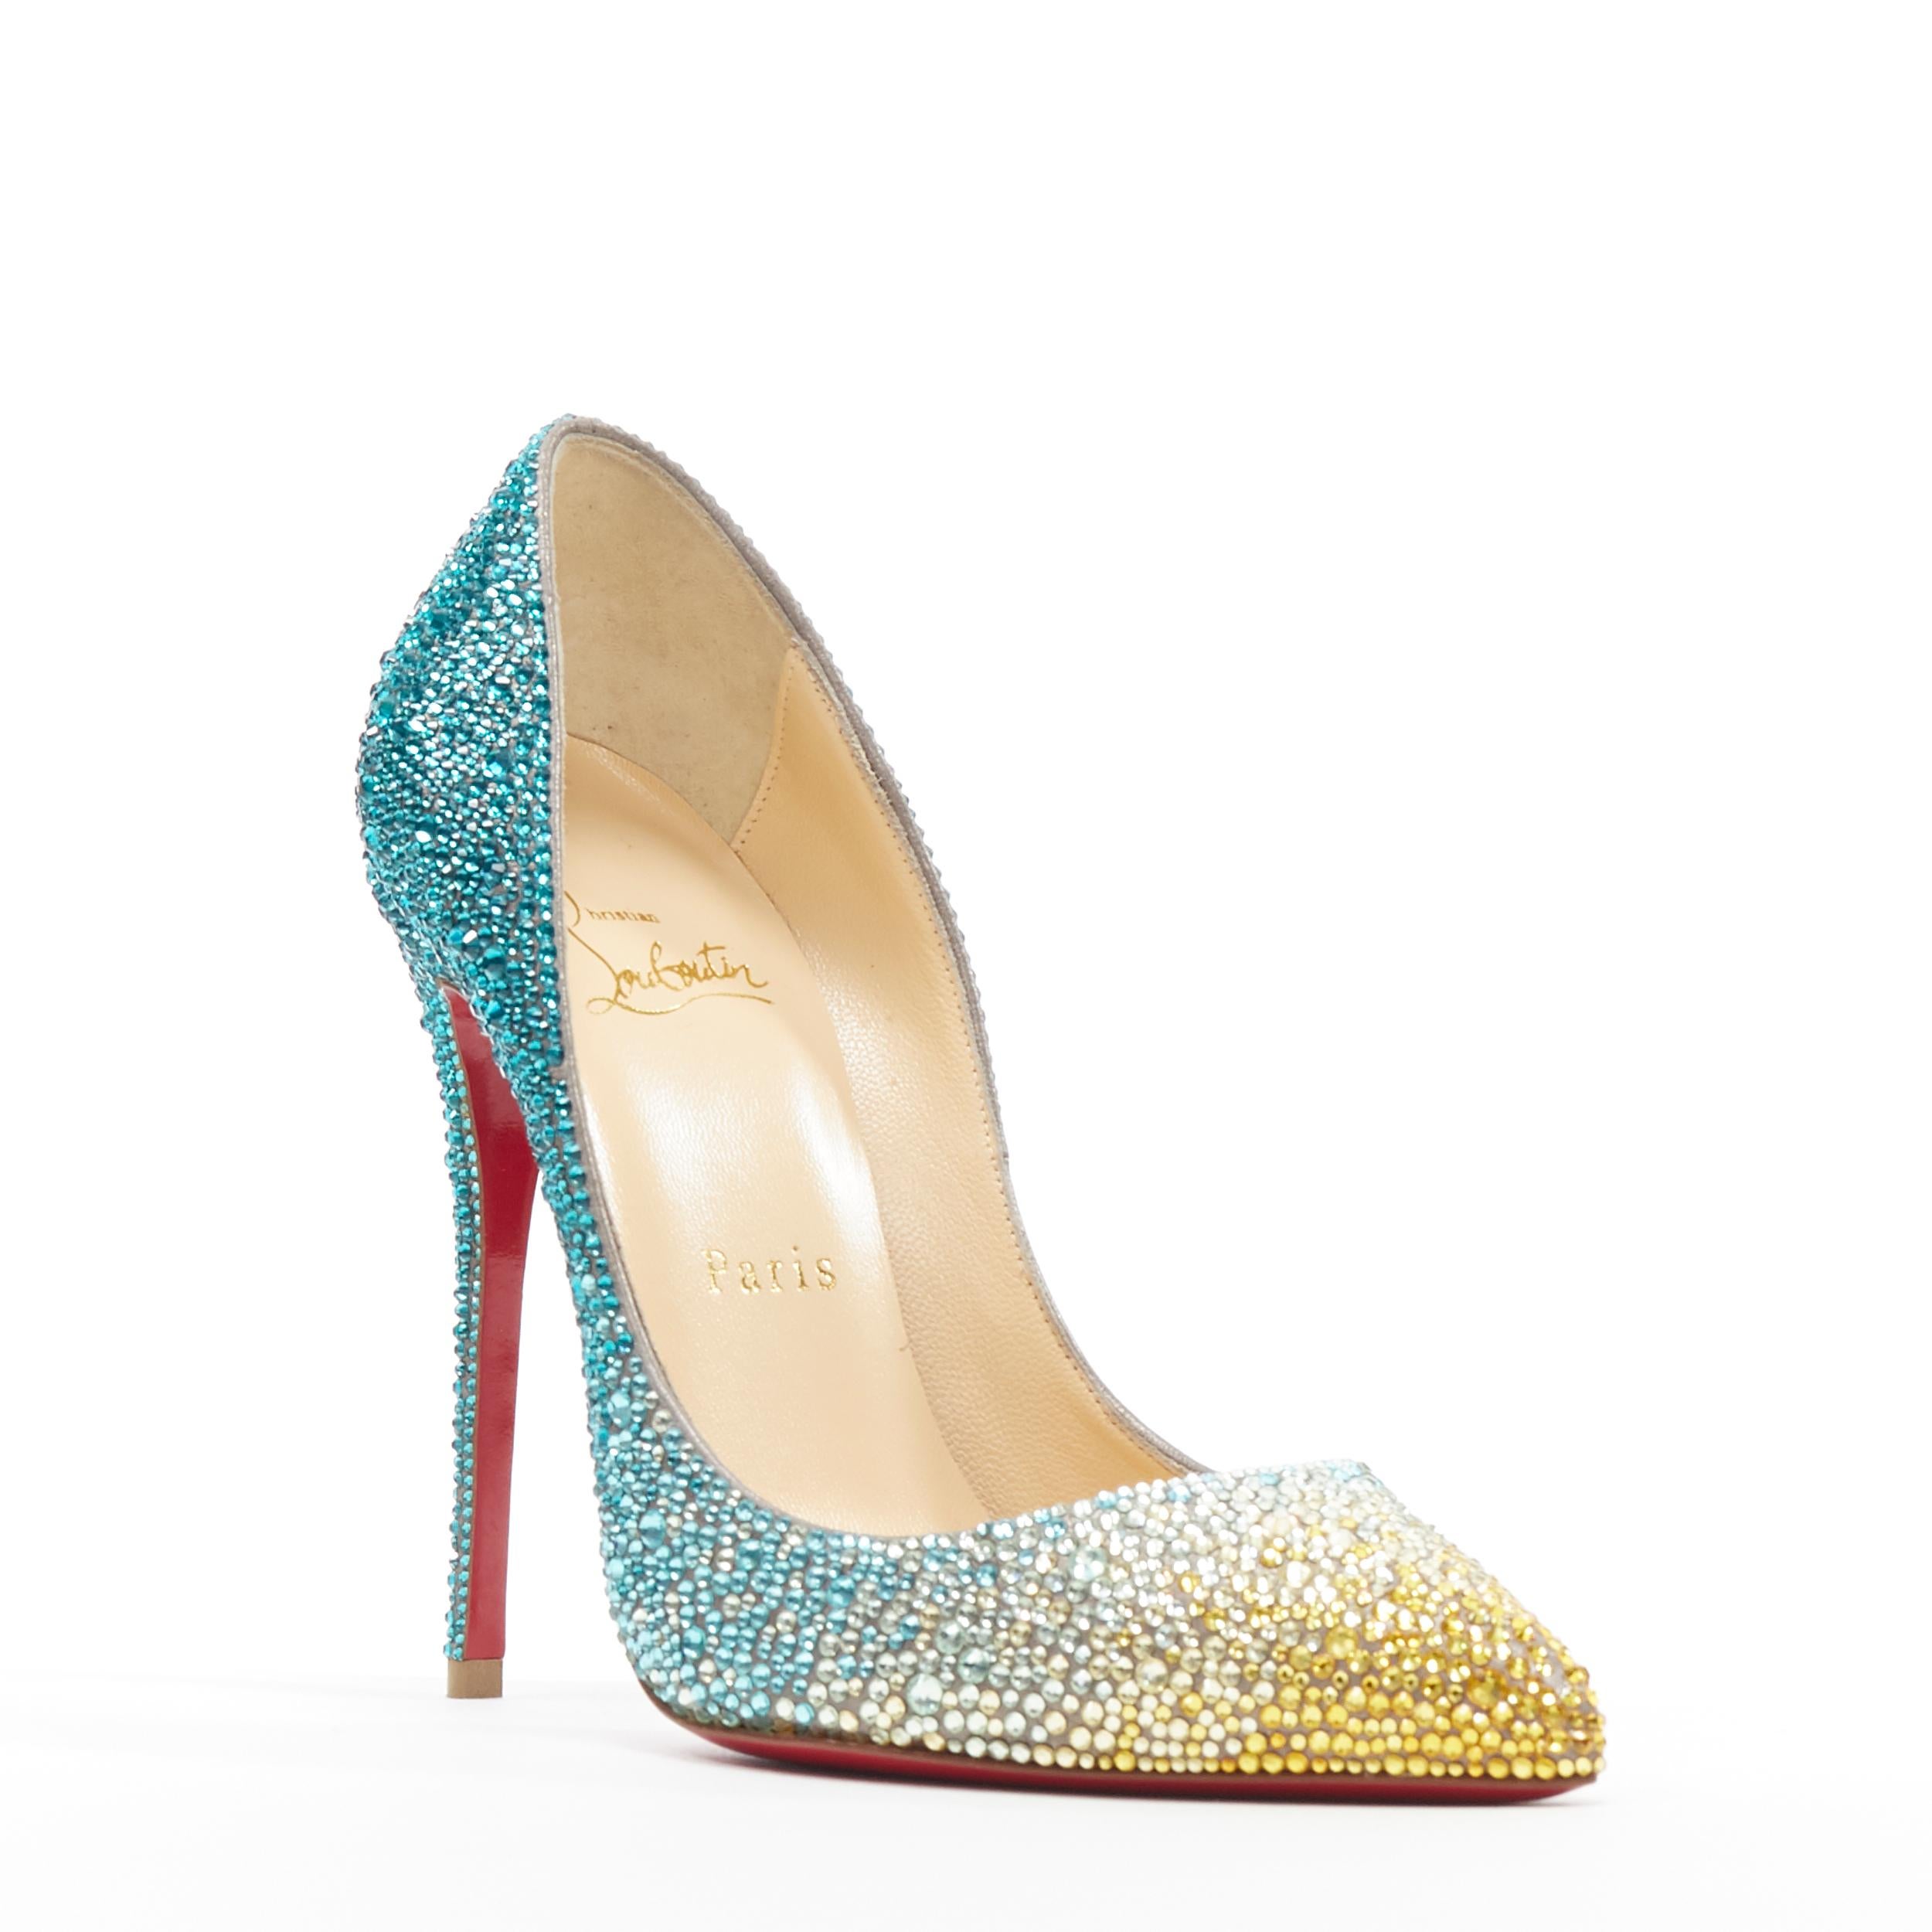 CHRISTIAN LOUBOUTIN So Kate 120 Strass crystal blue yellow gradient pump EU37.5
Brand: Christian Louboutin
Designer: Christian Louboutin
Model Name / Style: So Kate 120
Material: Leather
Color: Blue, yellow
Pattern: Solid
Extra Detail: So Kate 120.